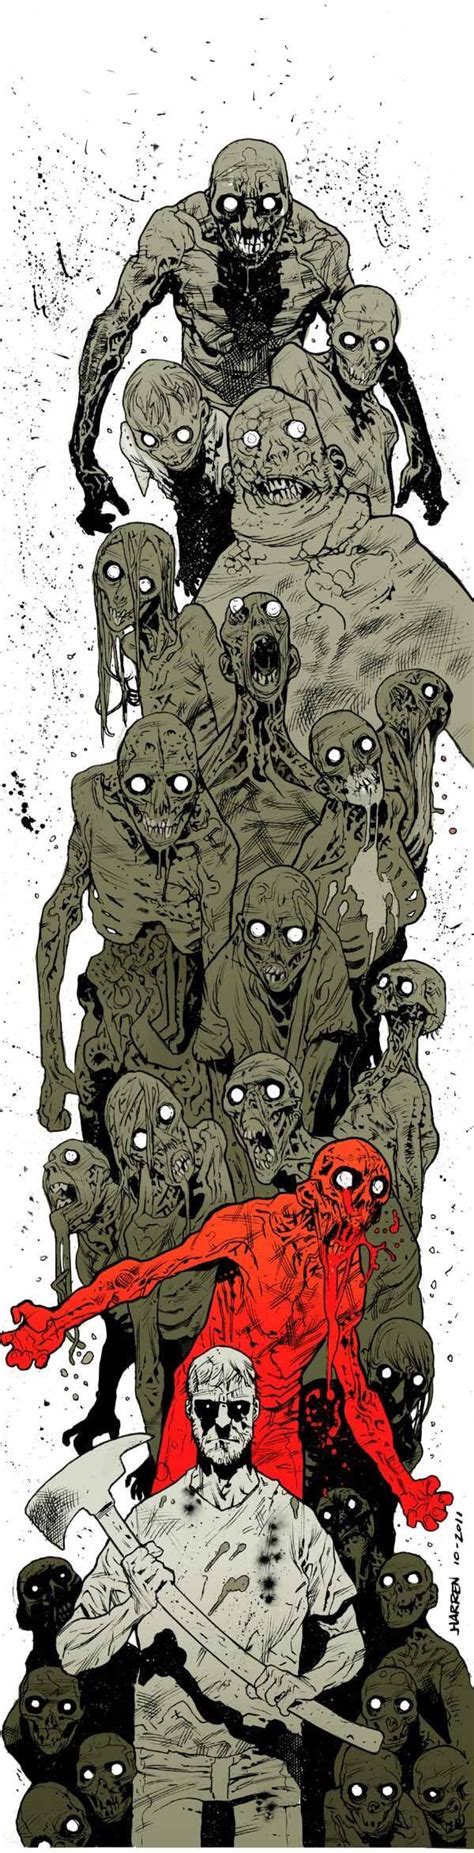 40 Creepy Zombie Drawings Illustrations And Concept Art Inspiration